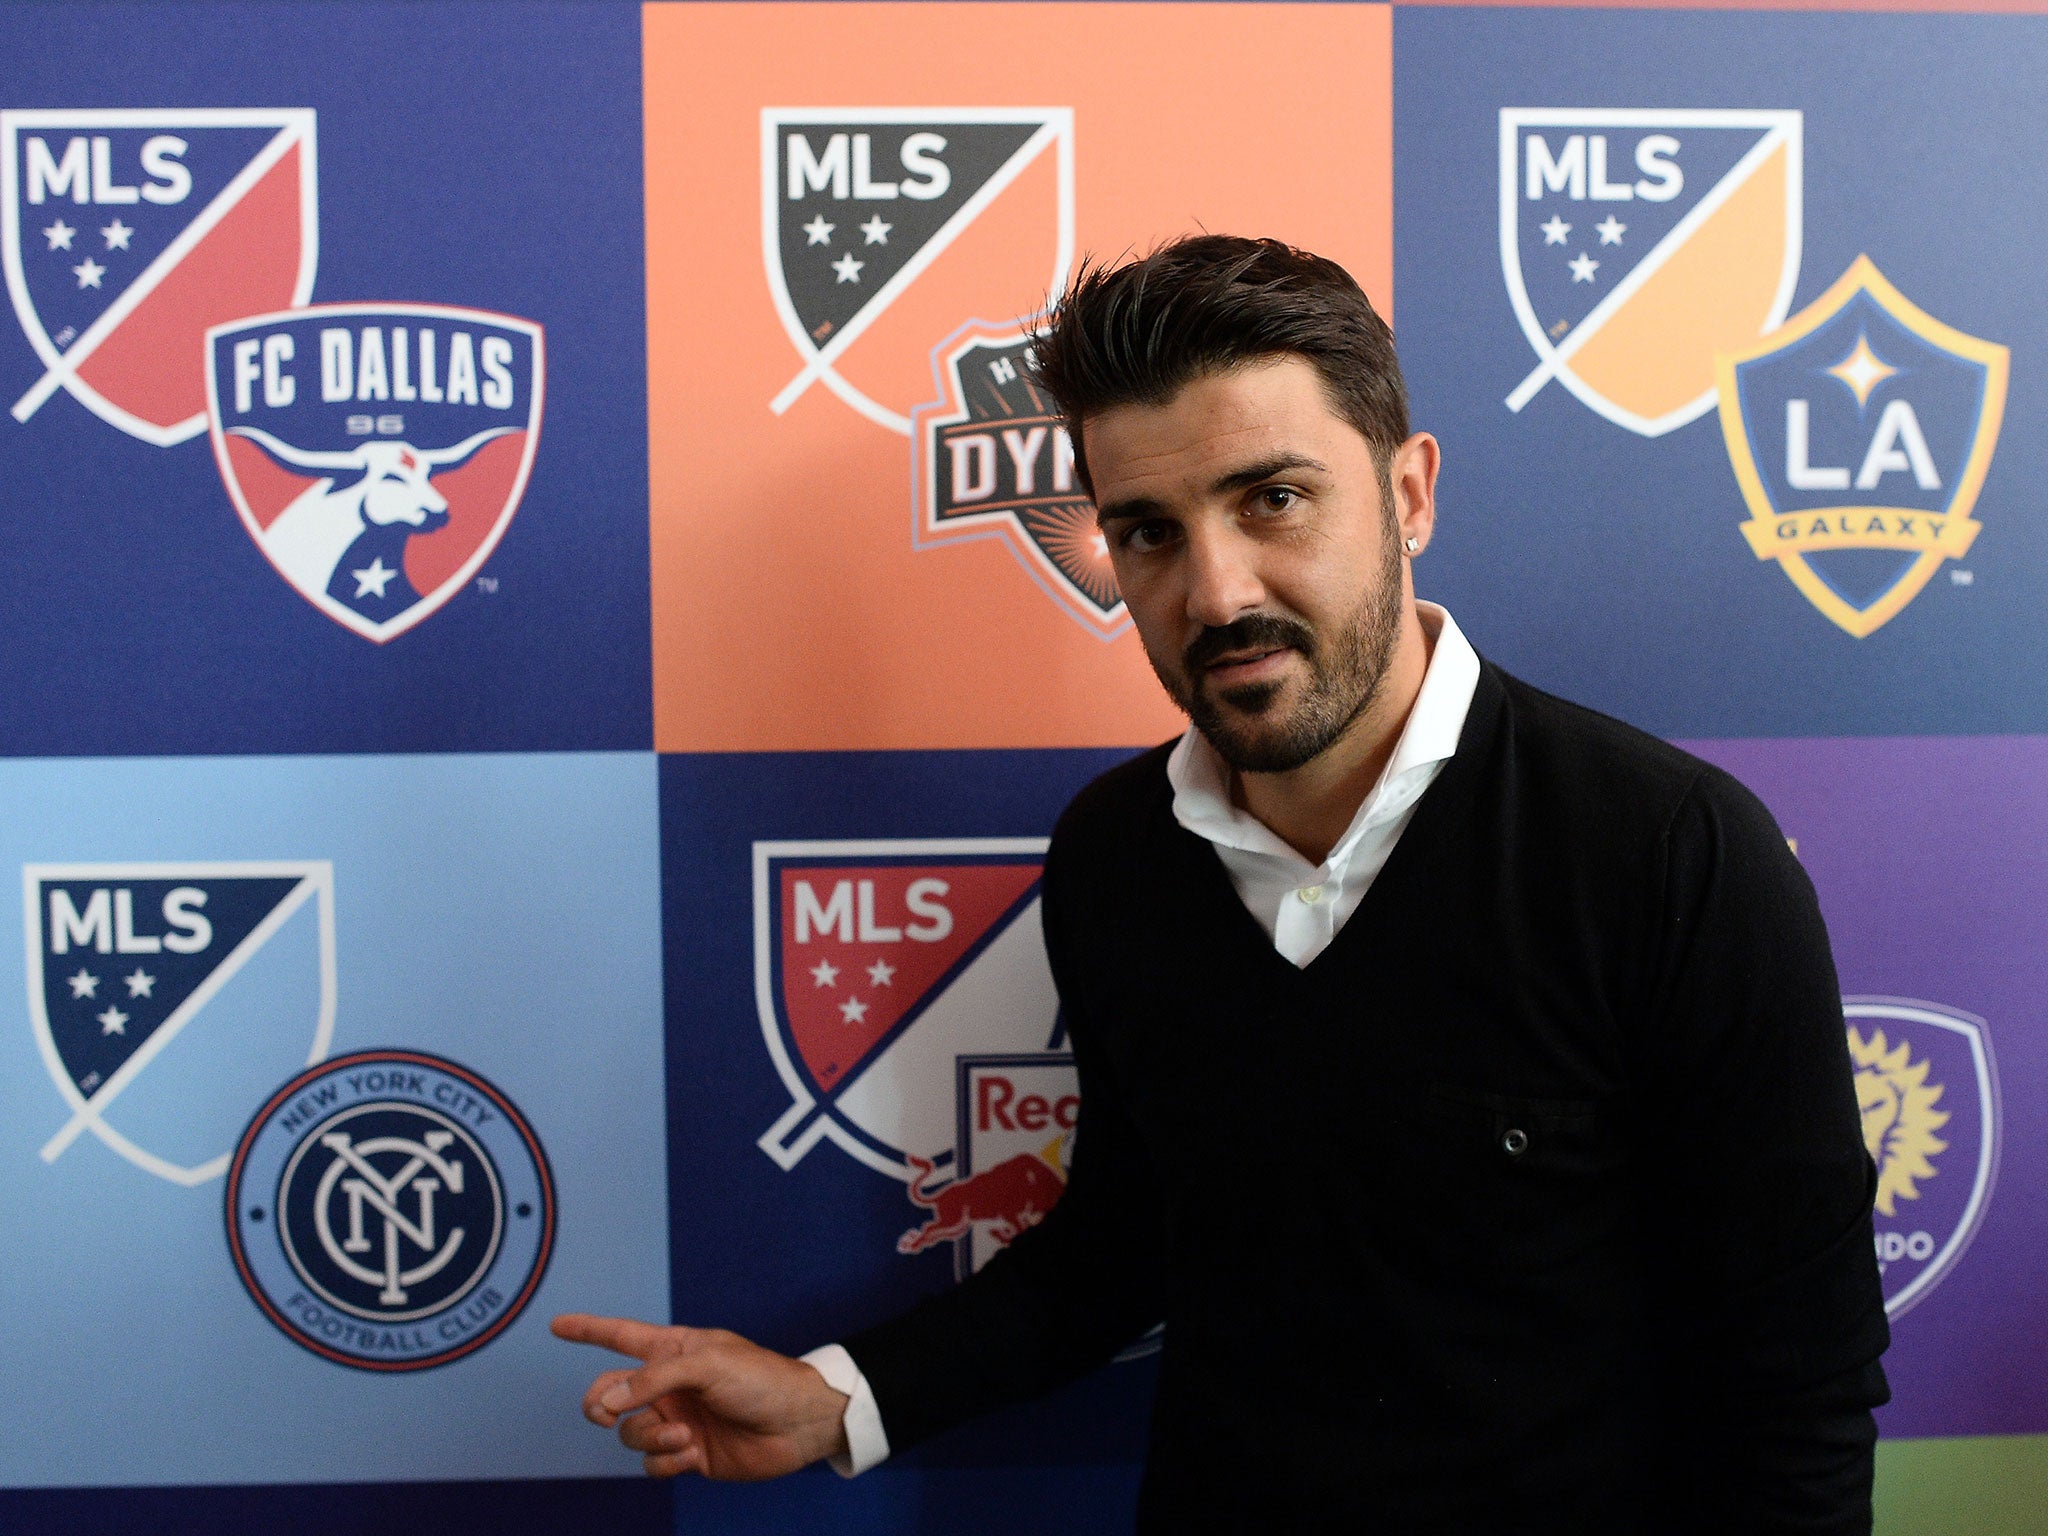 David Villa scored for New York City FC in their first ever game